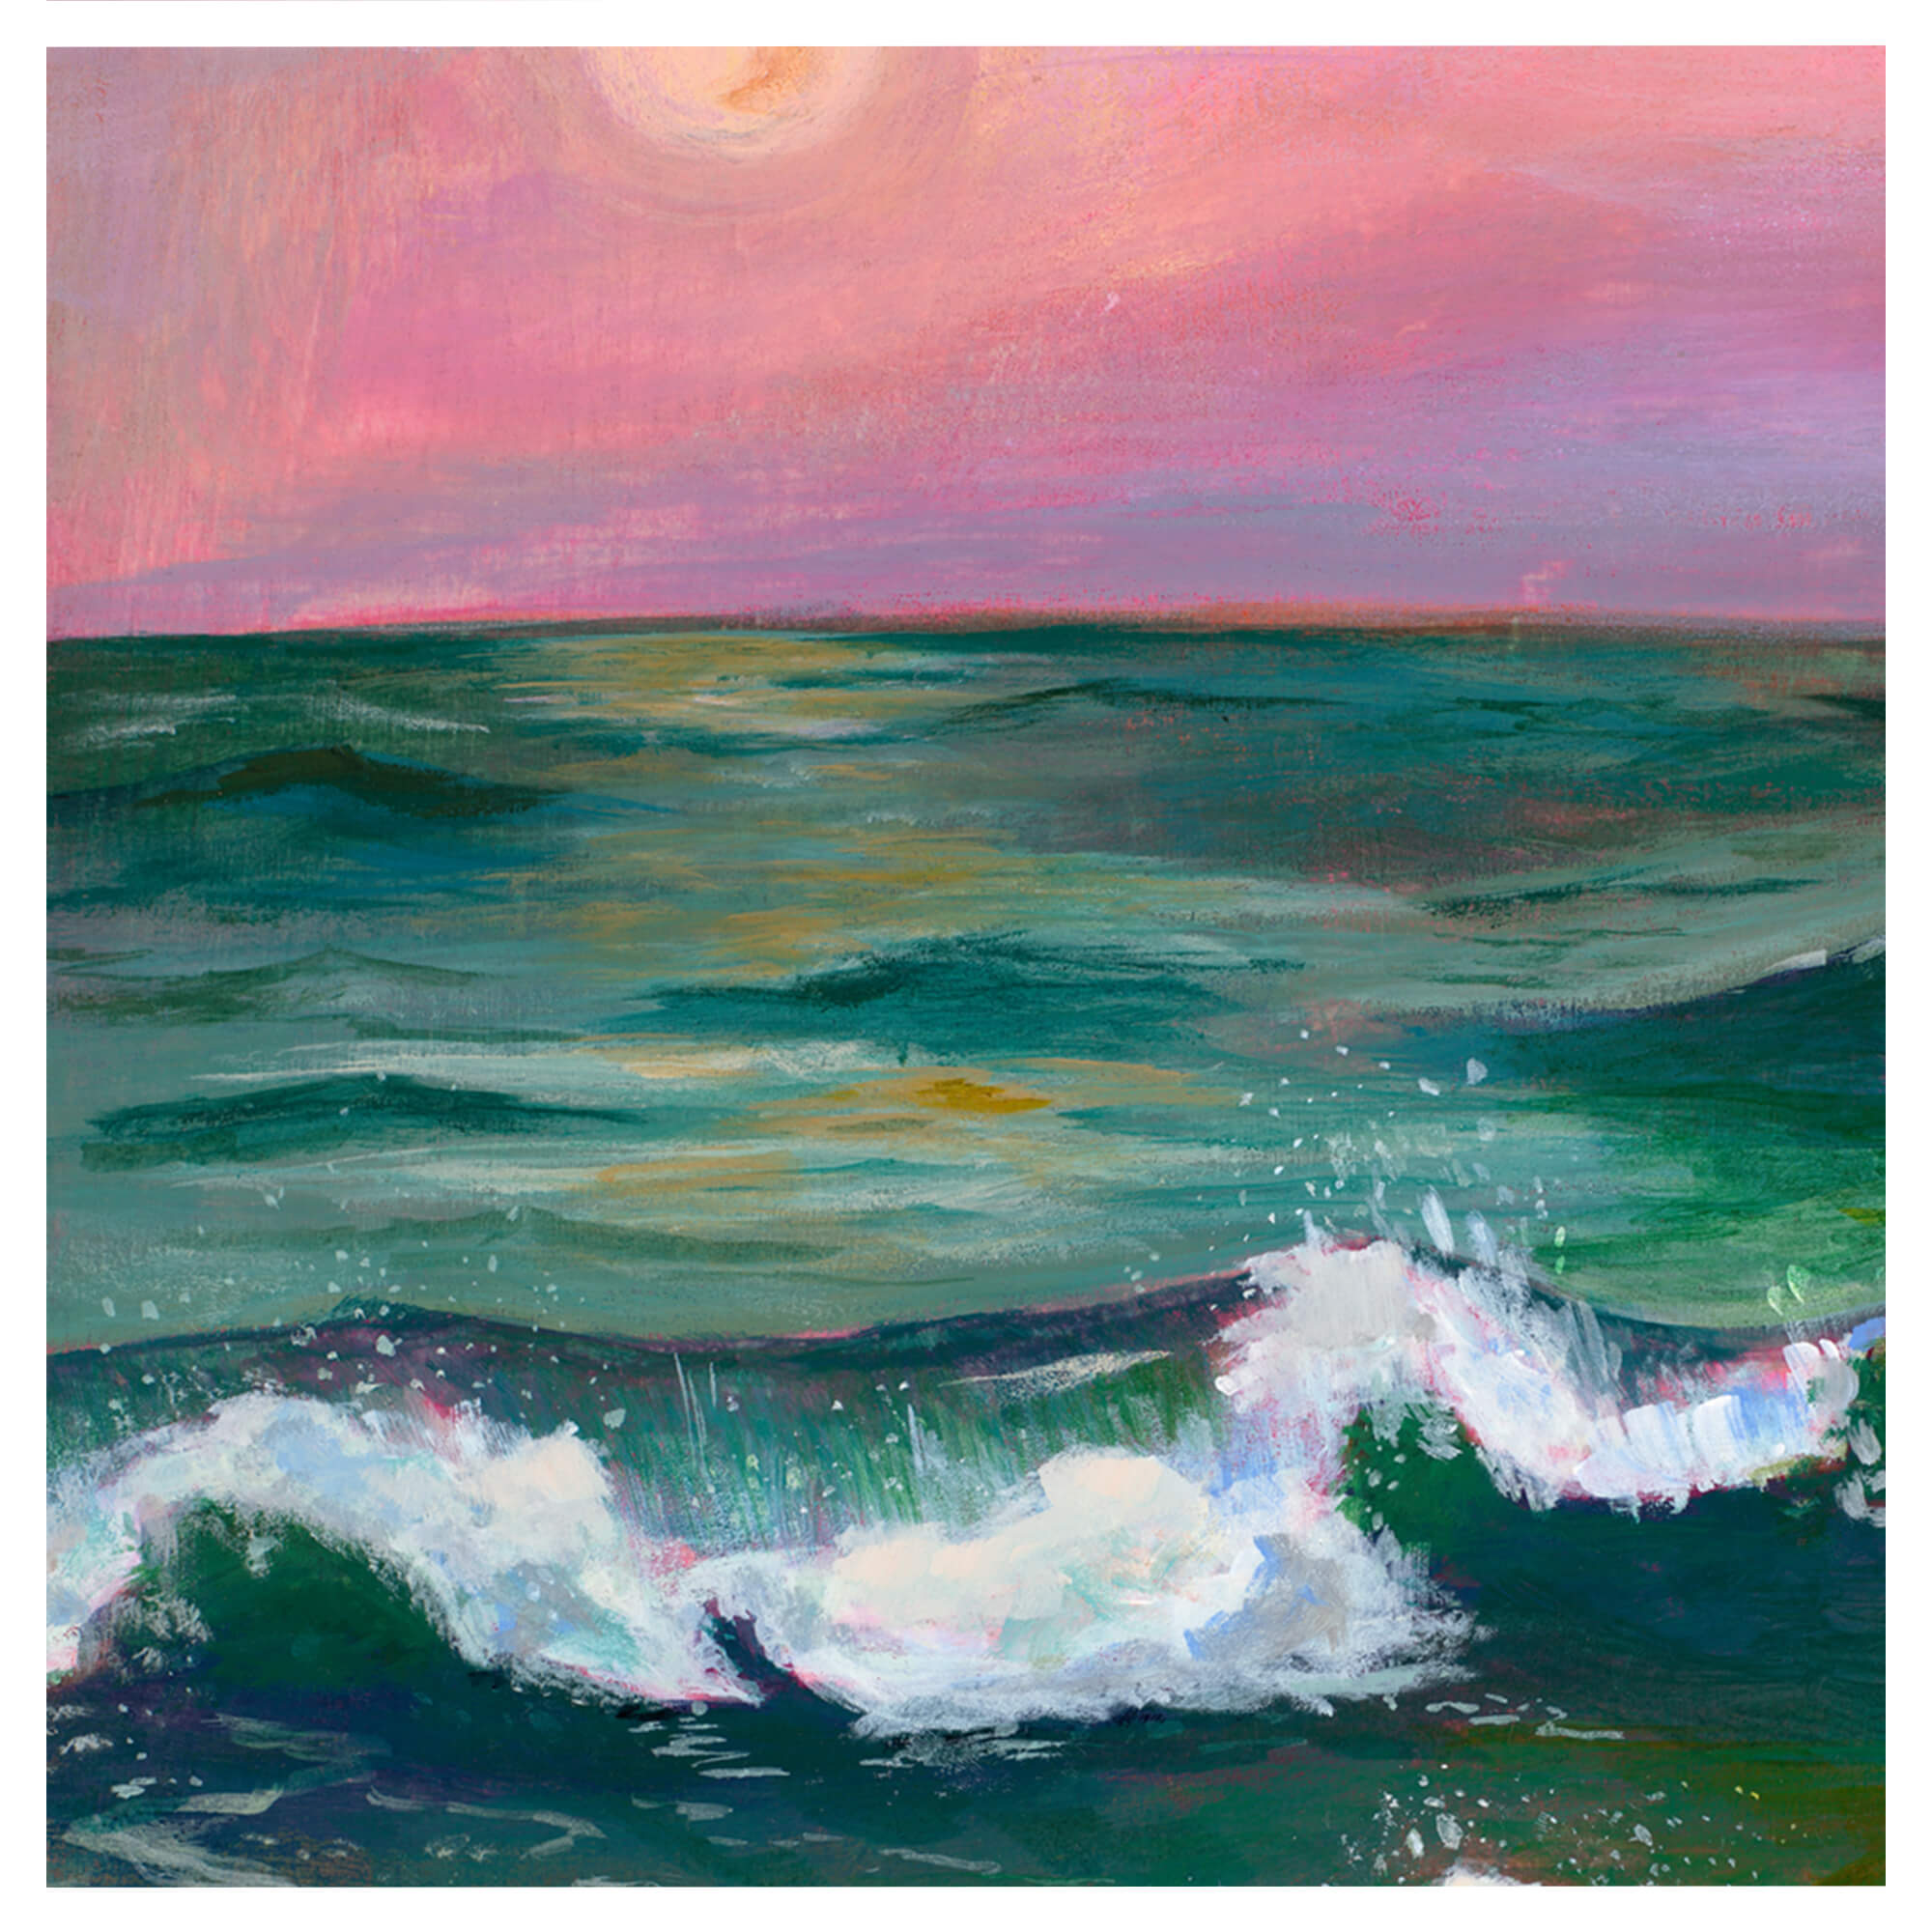 Sunset with pink sky by Hawaii artist Lindsay Wilkins